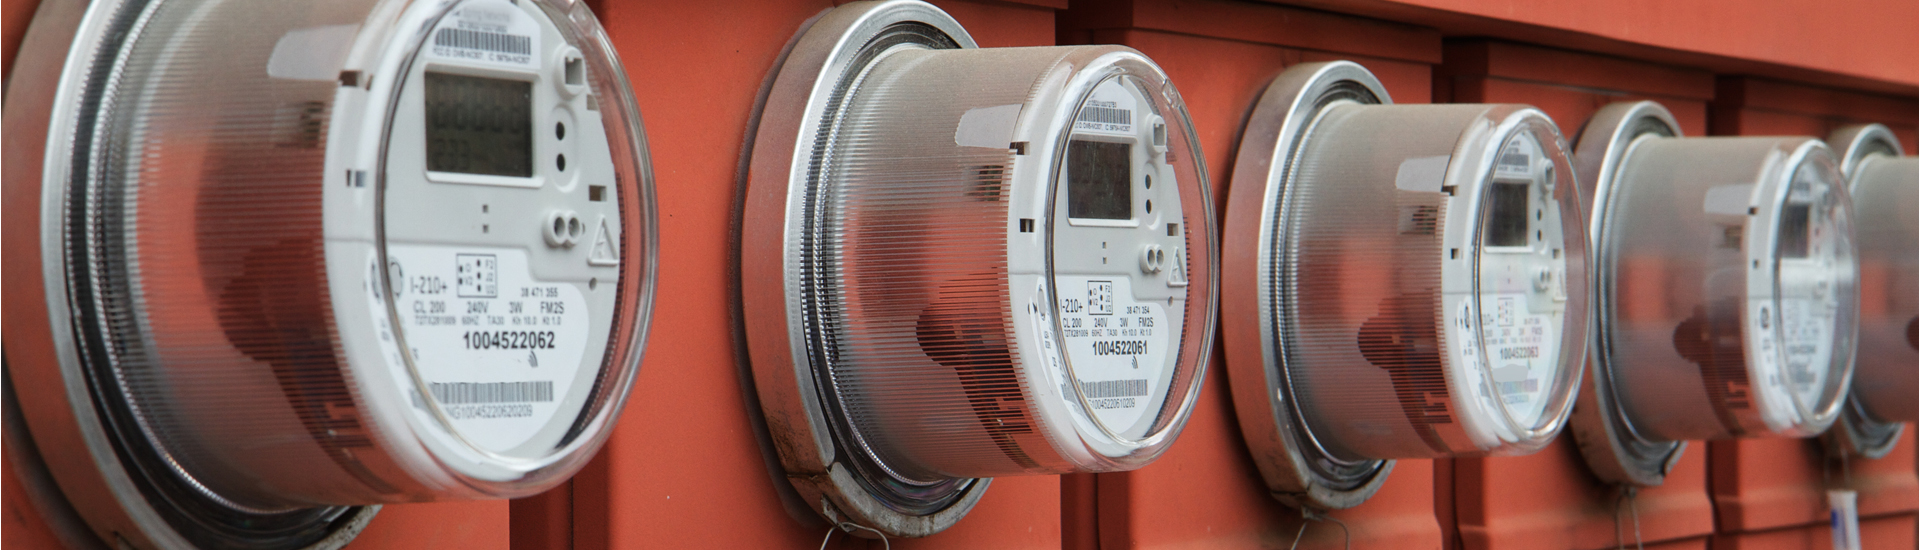 Electric Power Meters on Red Electrical Panels